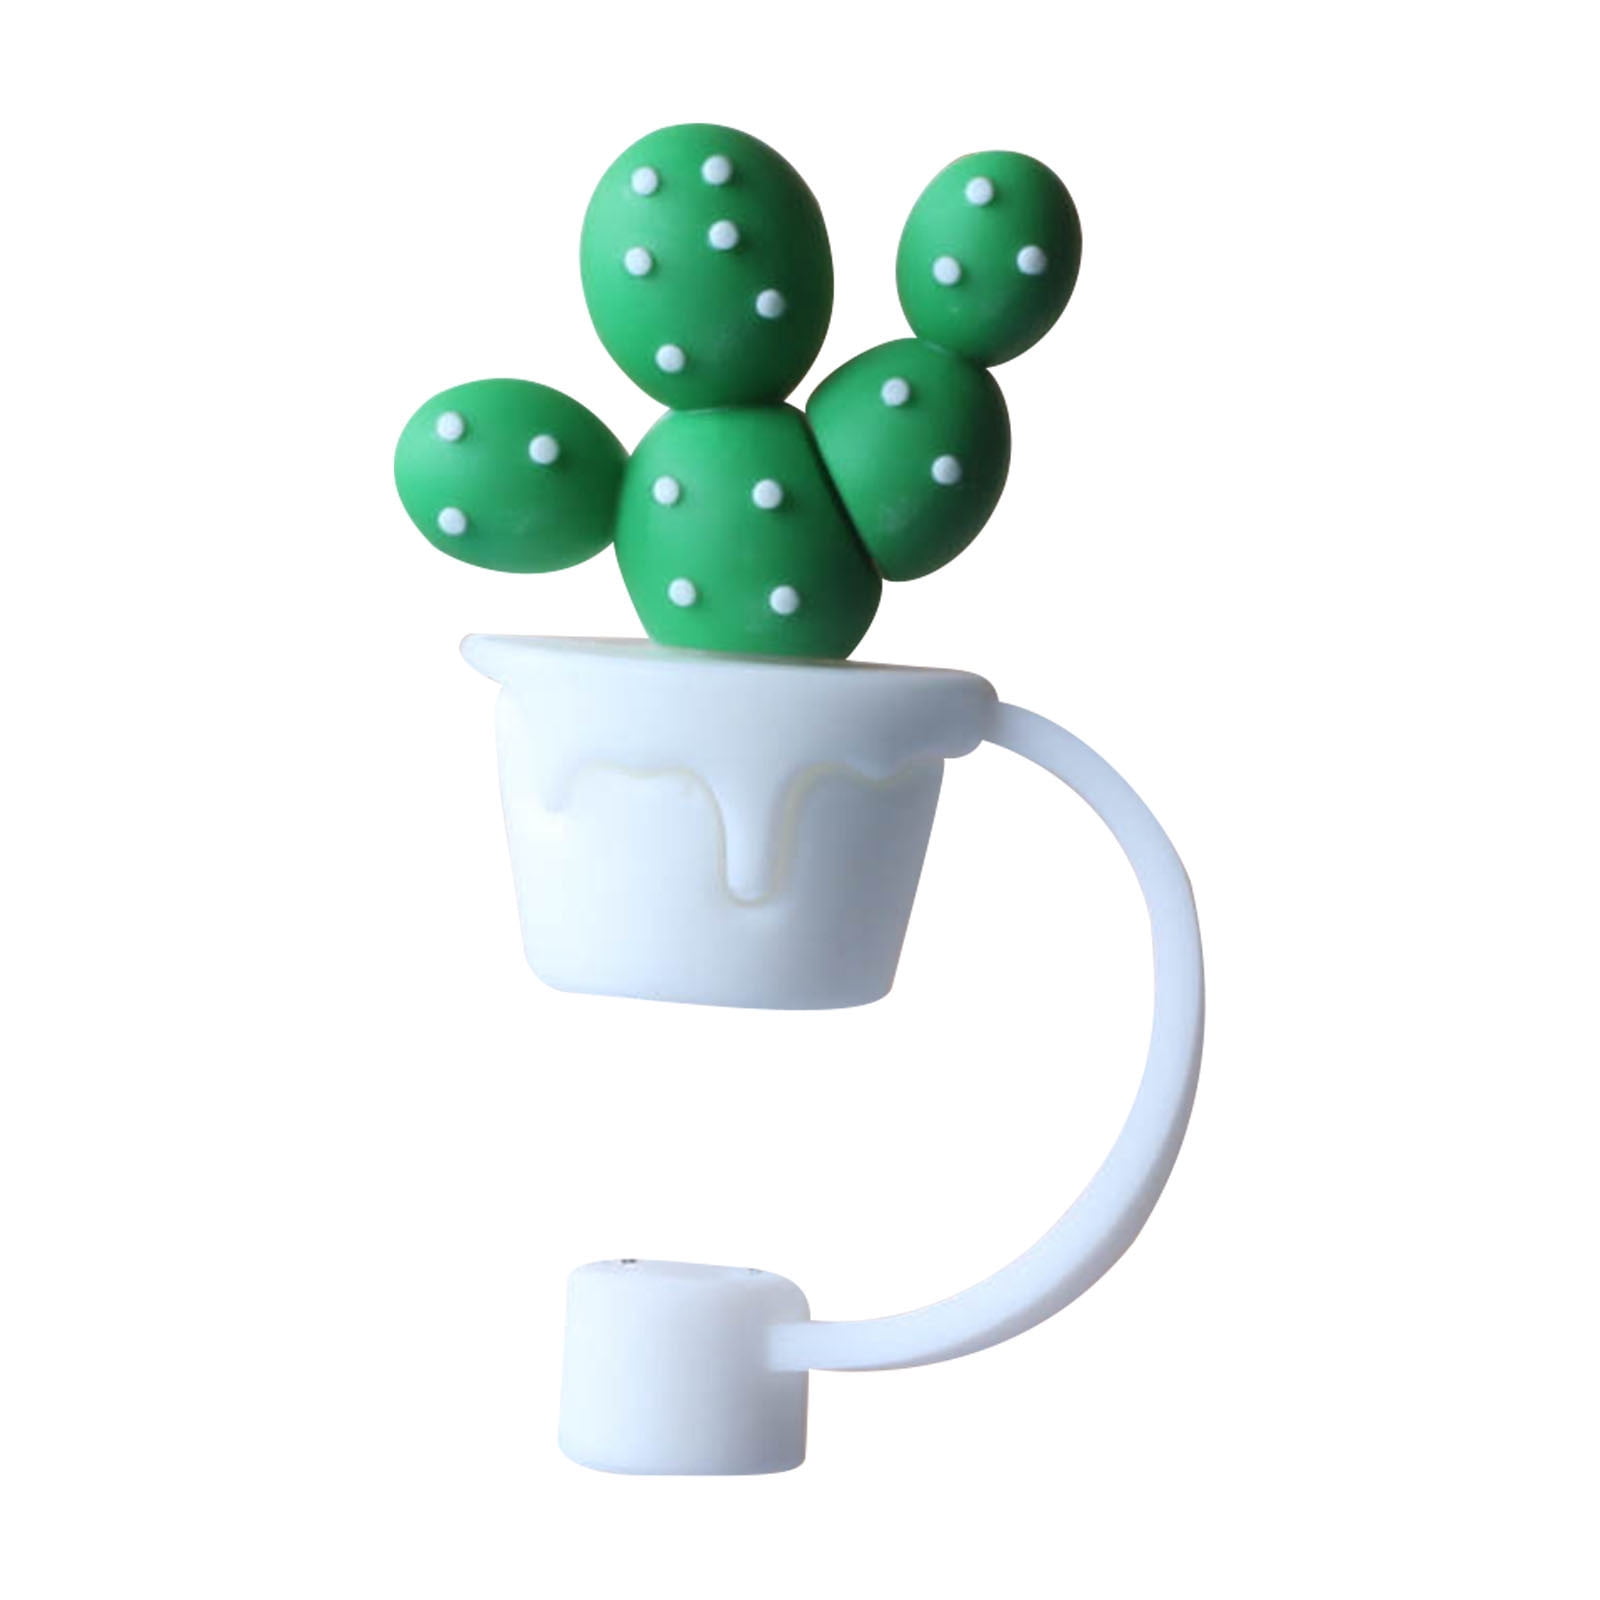  Silicone Mushroom Shape Straw Cover, Cute Mushroom Straw Covers  Cap Silicone, Straw Tips Drinking Dust Cap, Straw Covers Cap for Tumblers,  Creative Straw Plug Straw Caps Cup Accessories: Home & Kitchen